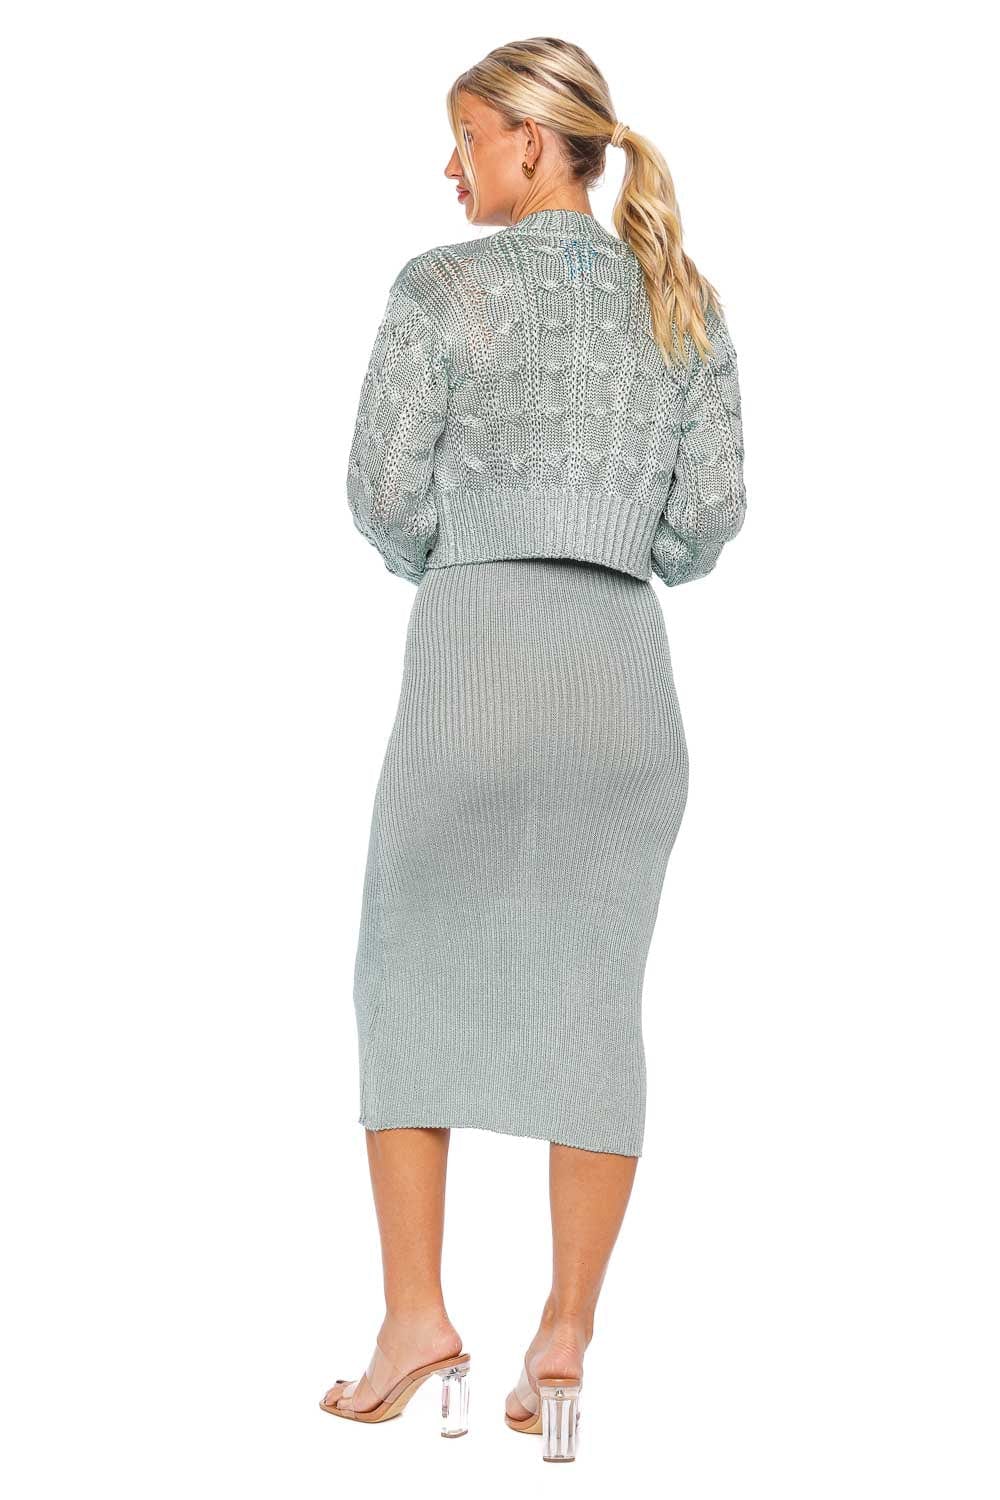 Calle Del Mar Storm Chunky Cable Knit Cardigan